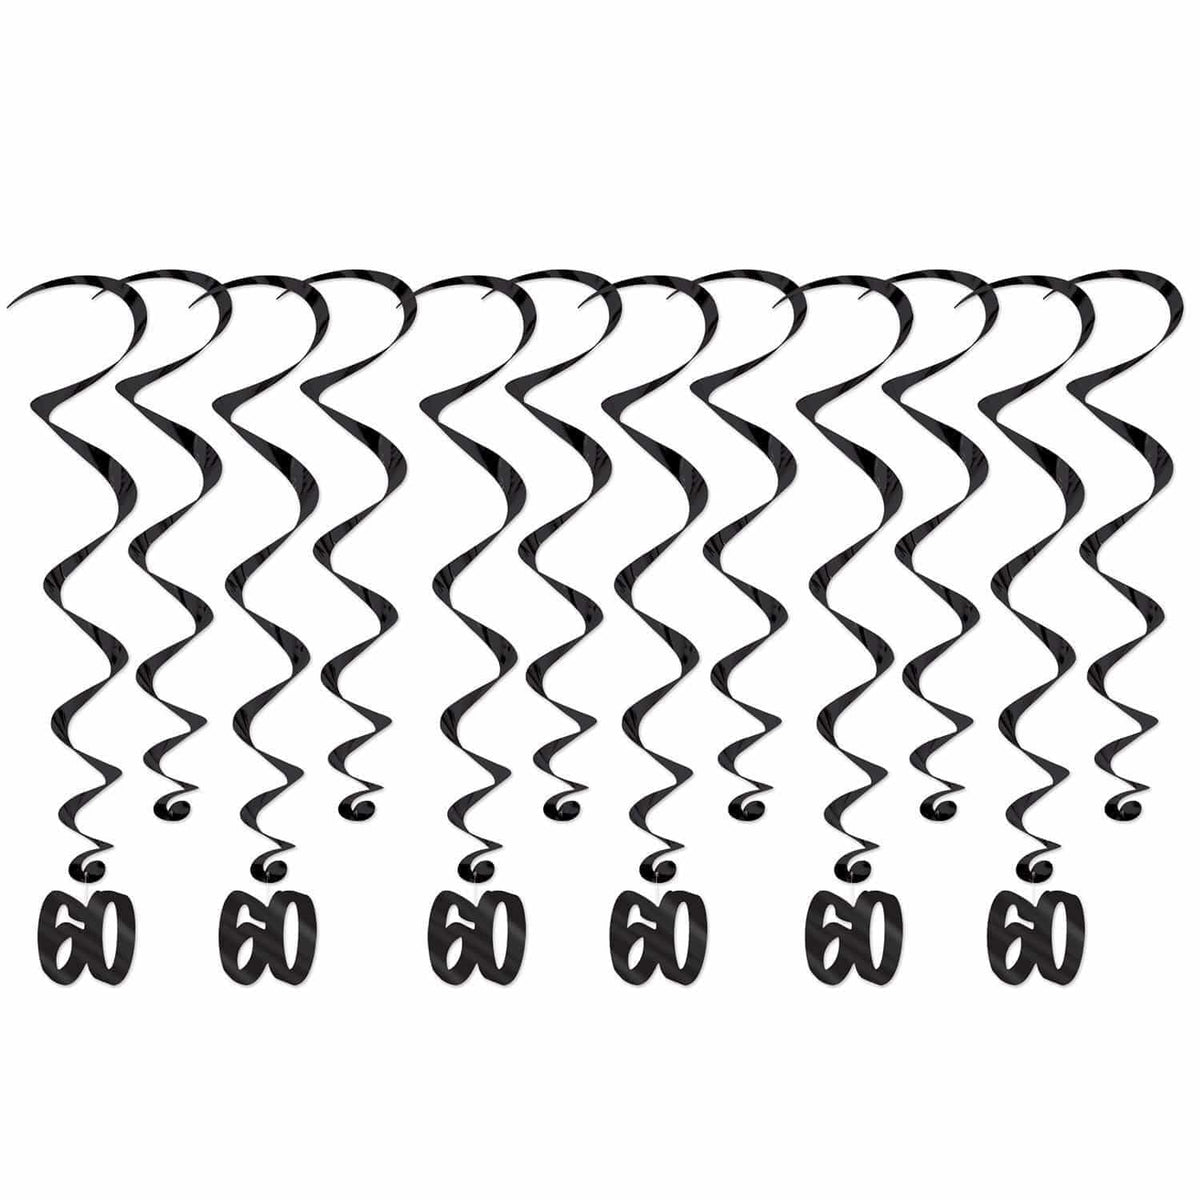 Buy Age Specific Birthday Hanging Swirl Decorations - 60th Birthday 6/pkg. sold at Party Expert